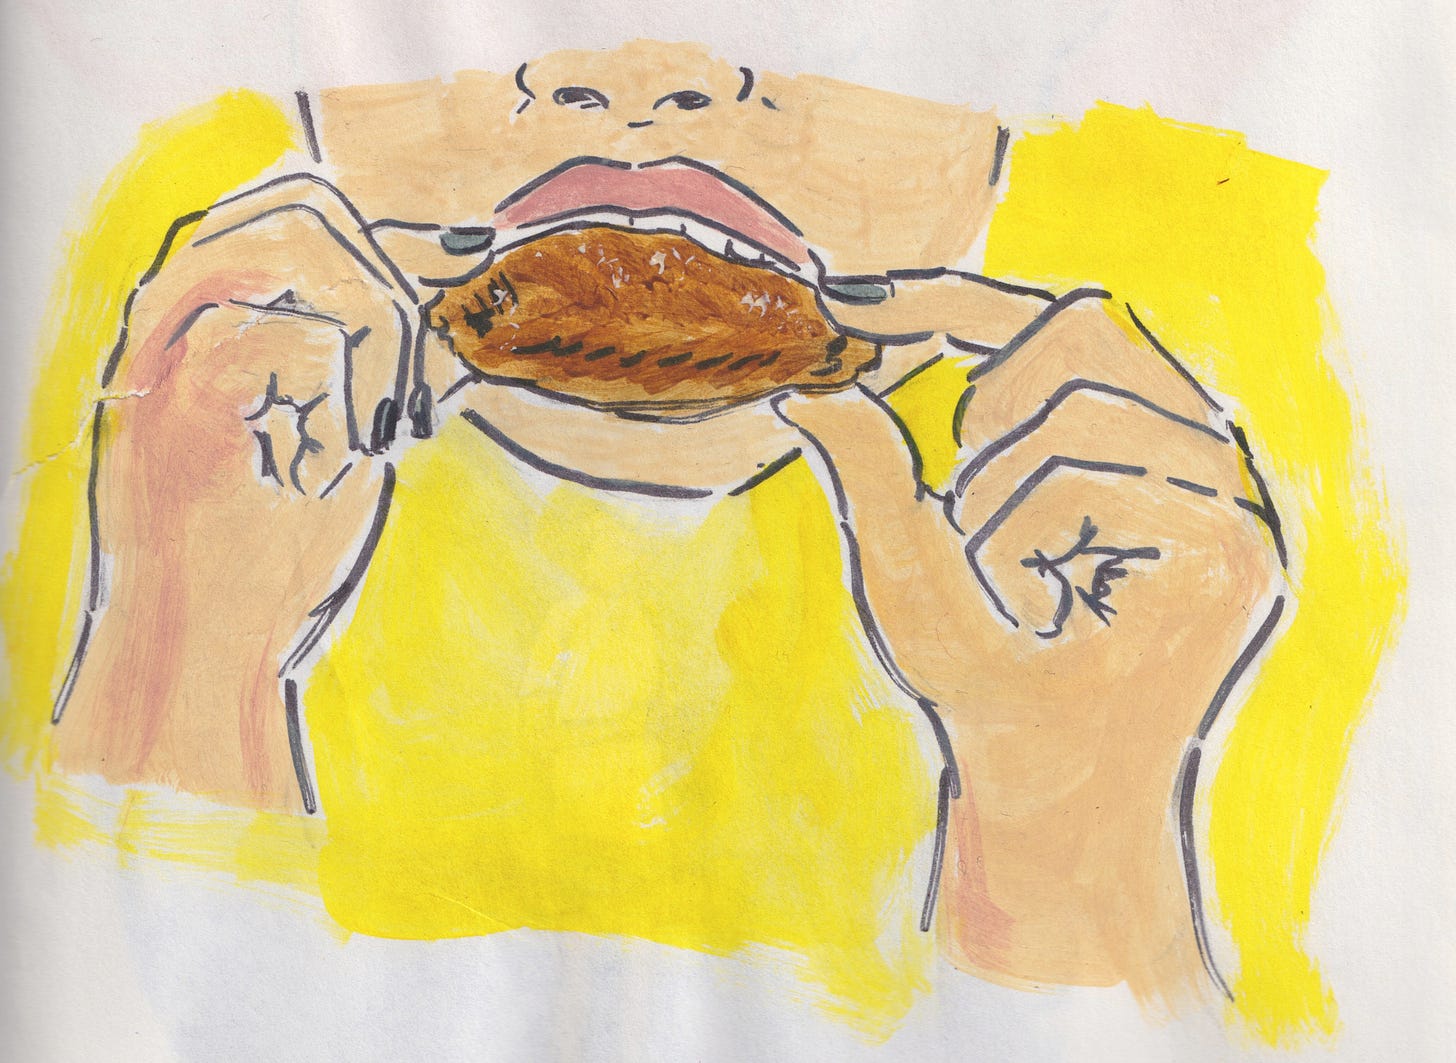 Painting of me eating a chicken wing up close. Fingernails are painted. 